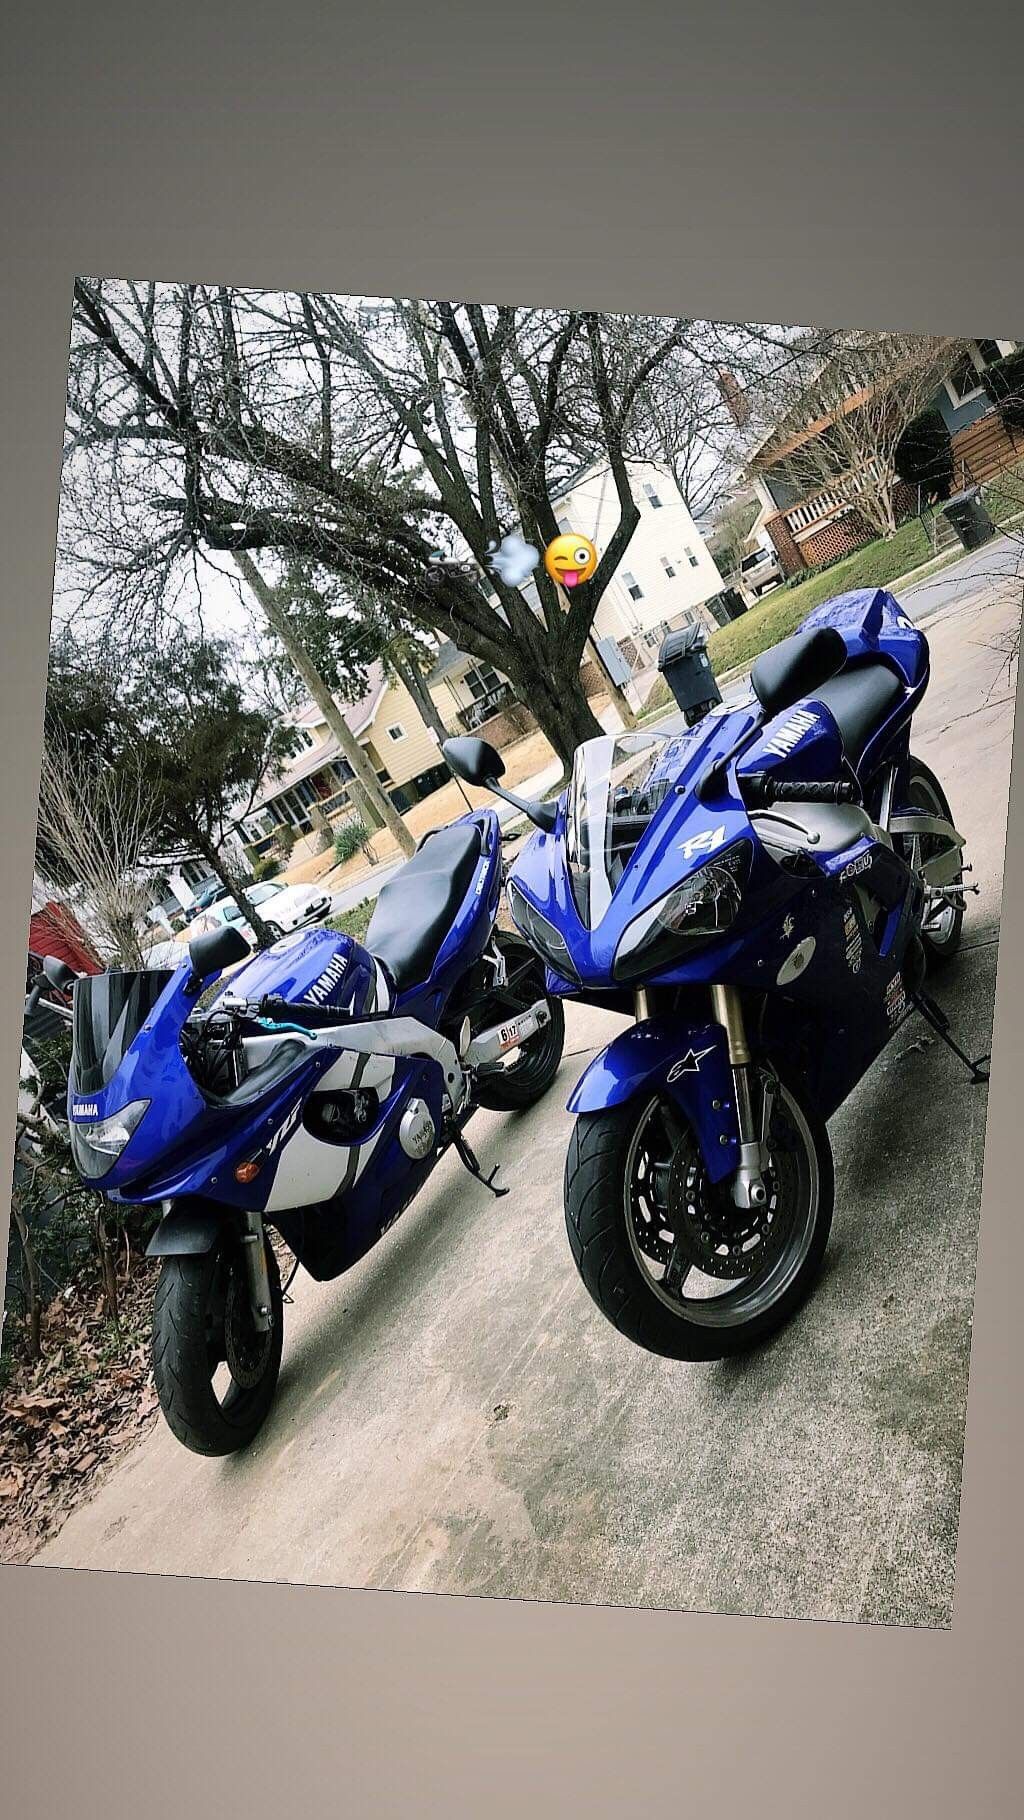 R1 with 17000 miles